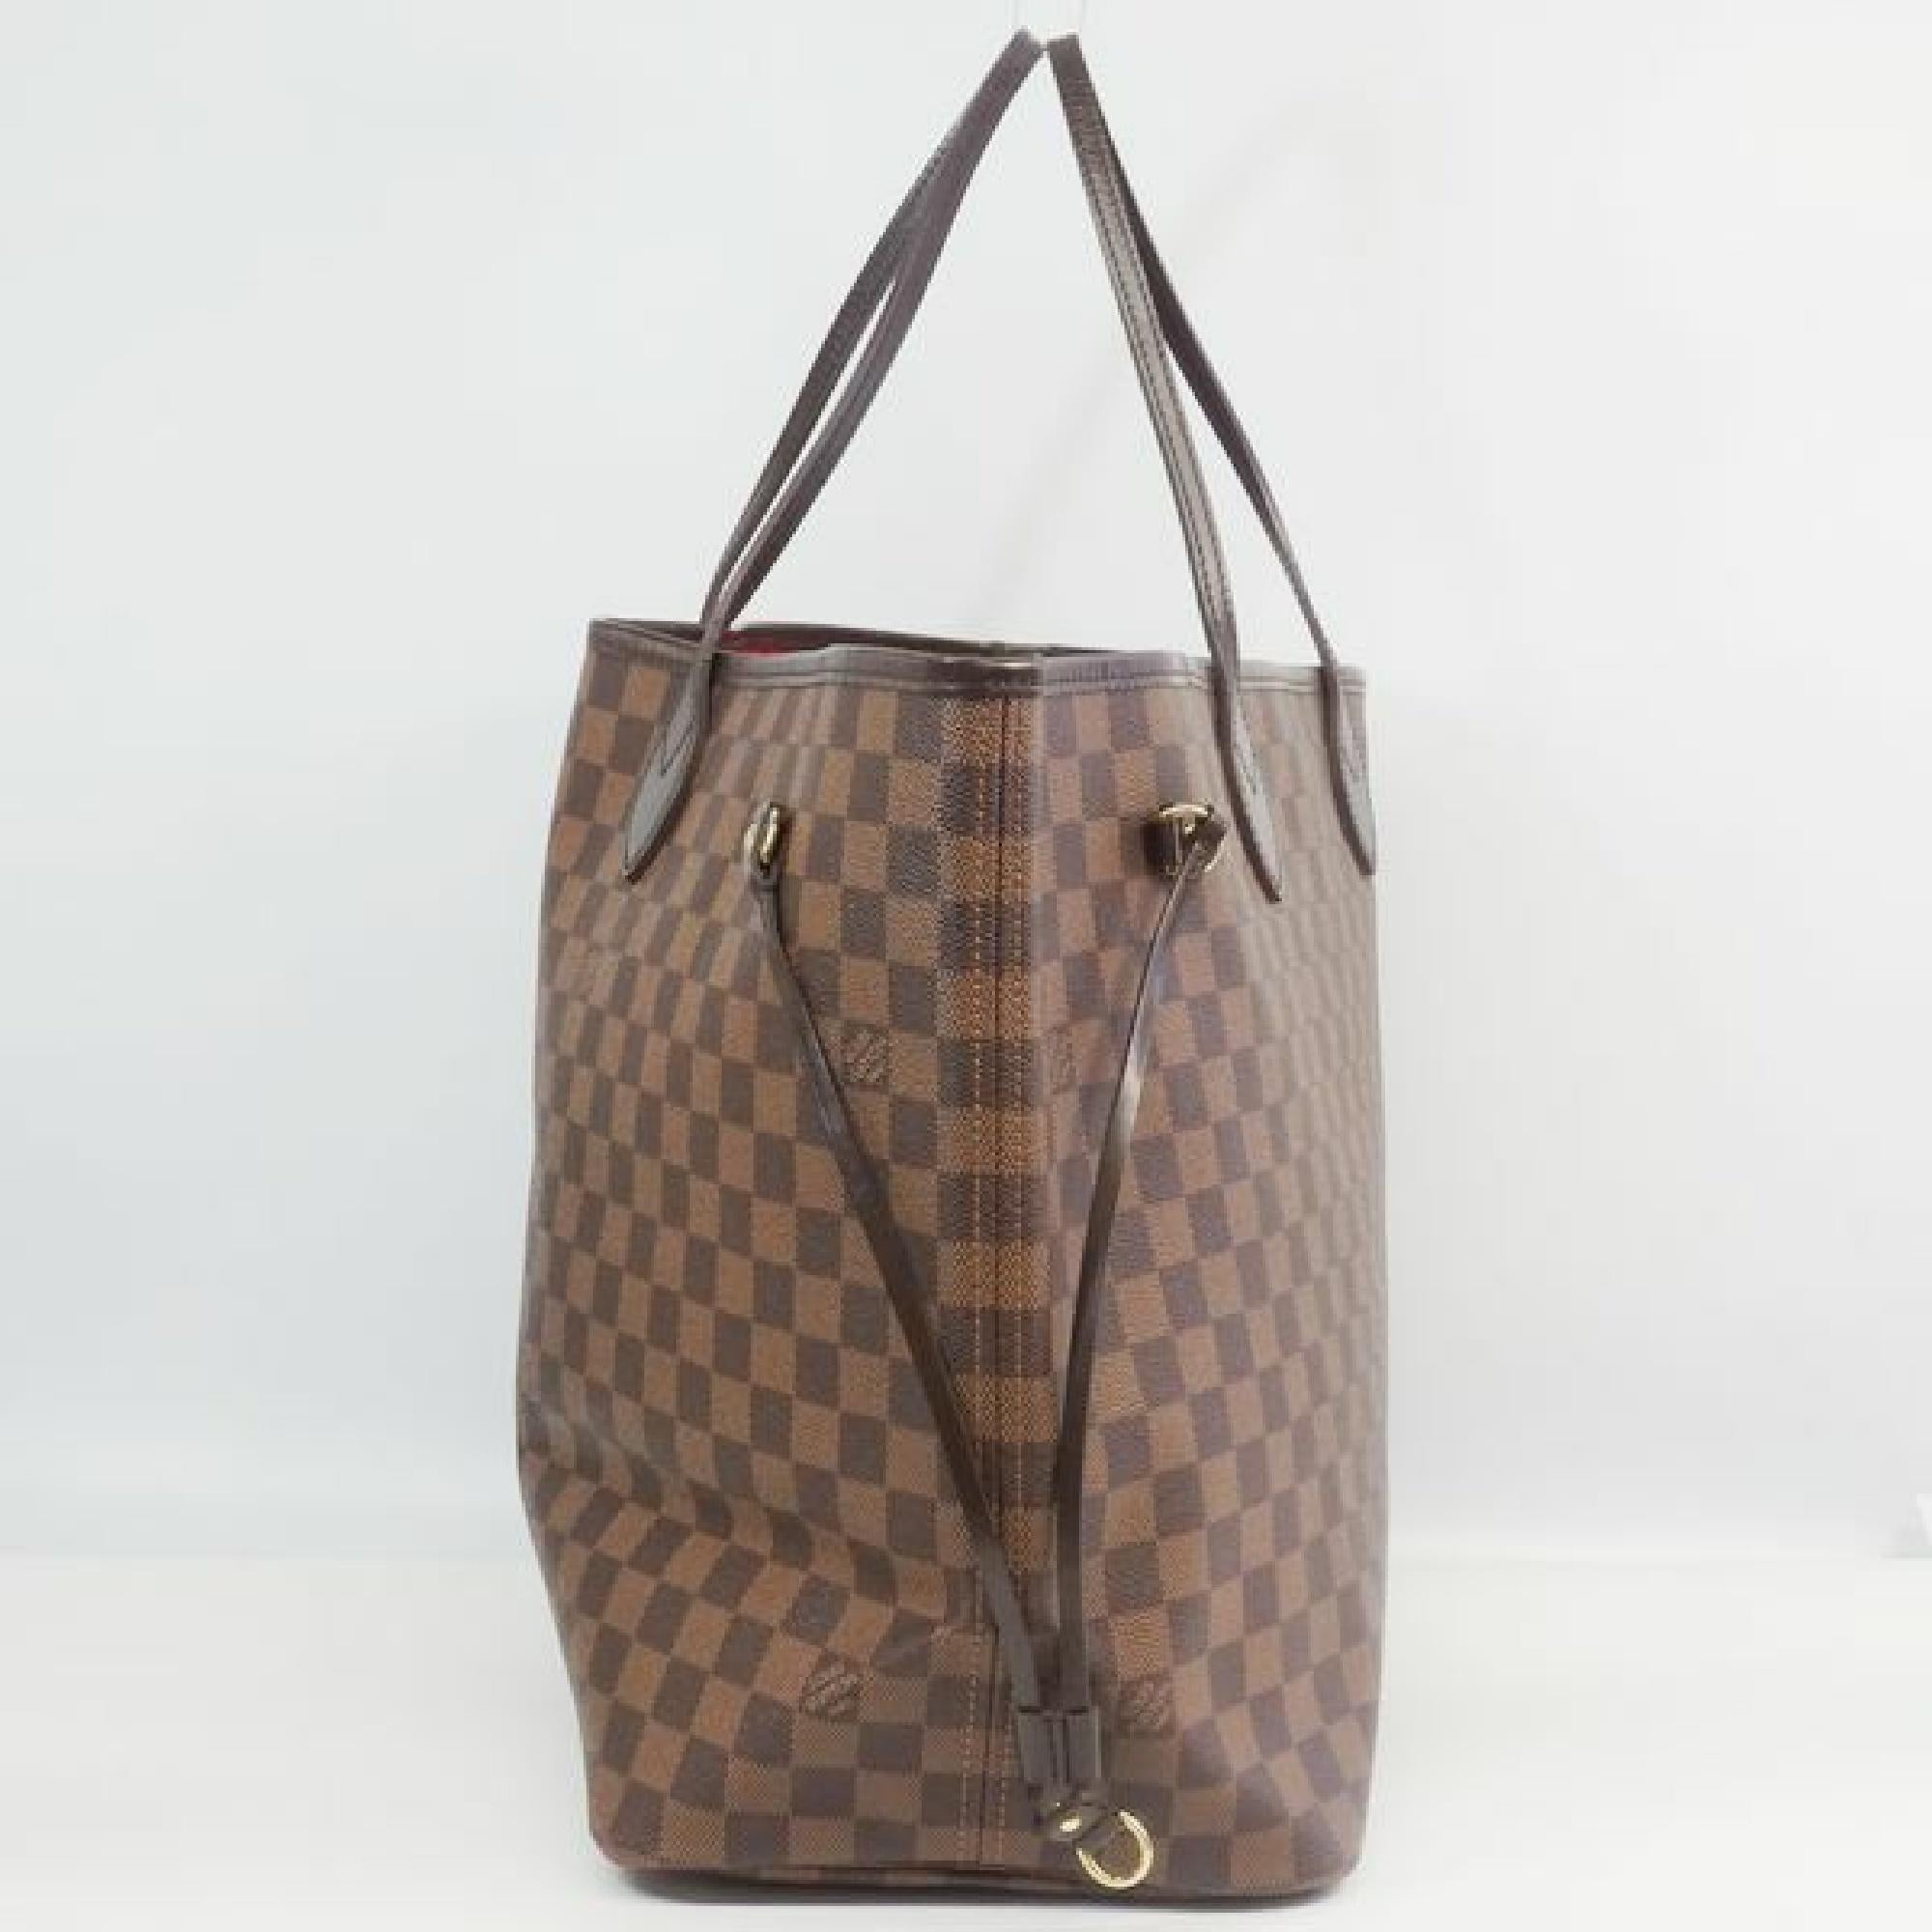 An authentic NeverfullGM  Womens  tote bag N51106  Damier ebene. The color is Damier ebene. The outside material is Damier canvas. The pattern is NeverfullGM. This item is Contemporary. The year of manufacture would be 2011.
Rank
A beauty